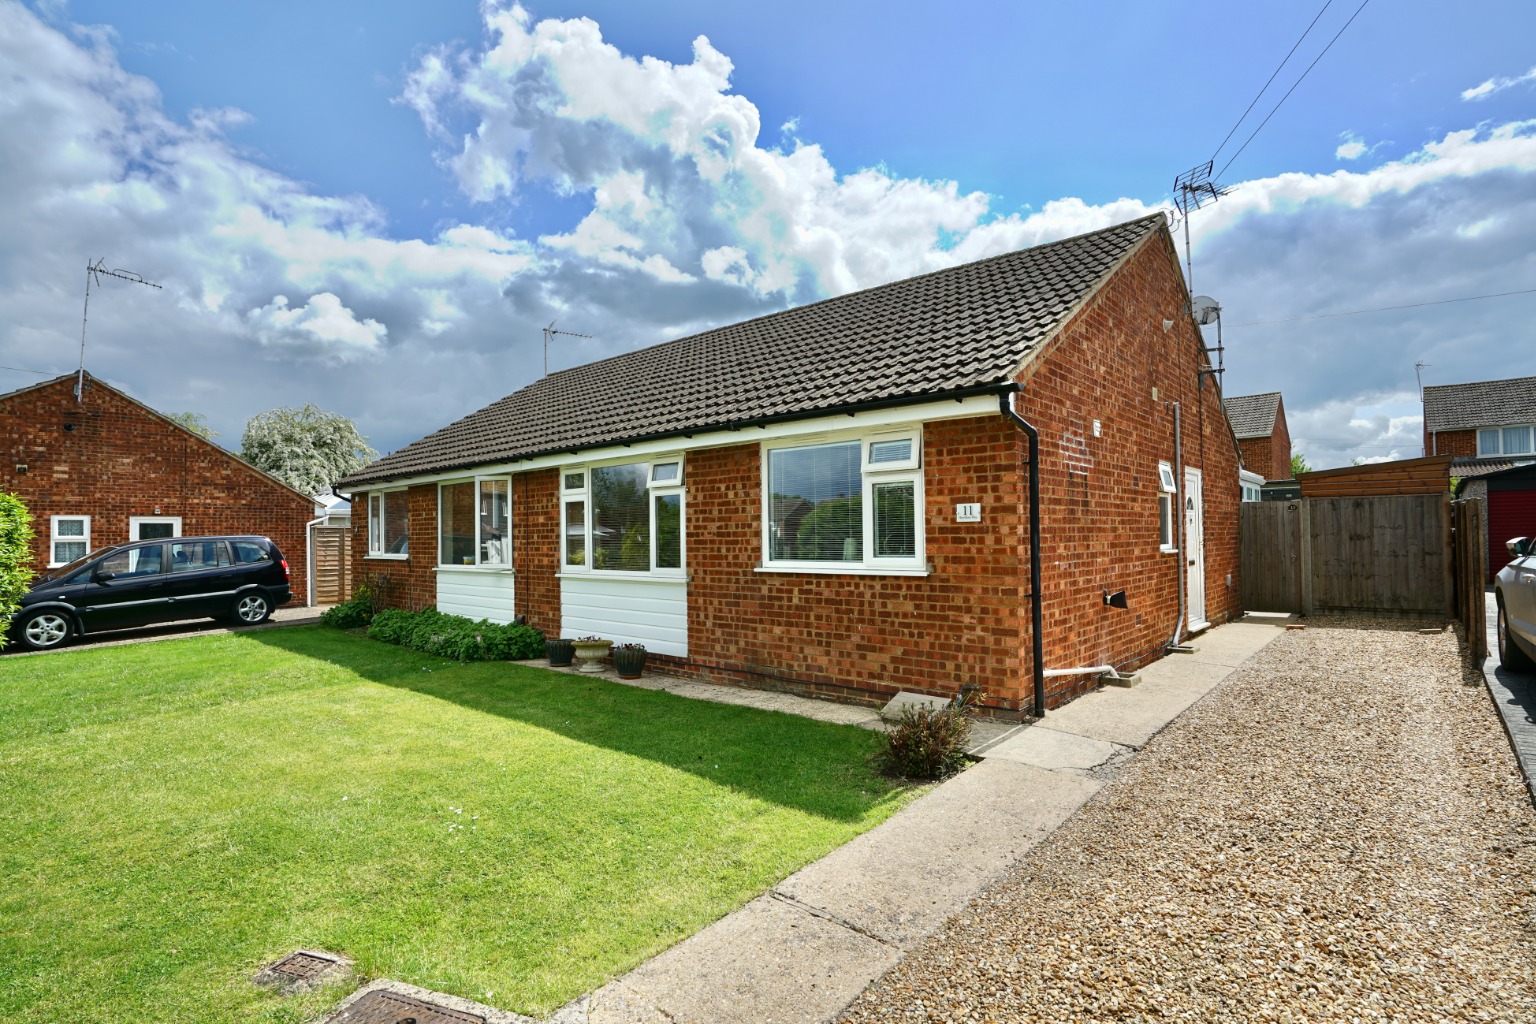 2 bed semi-detached bungalow for sale in Hawthorn Way, St Ives - Property Image 1